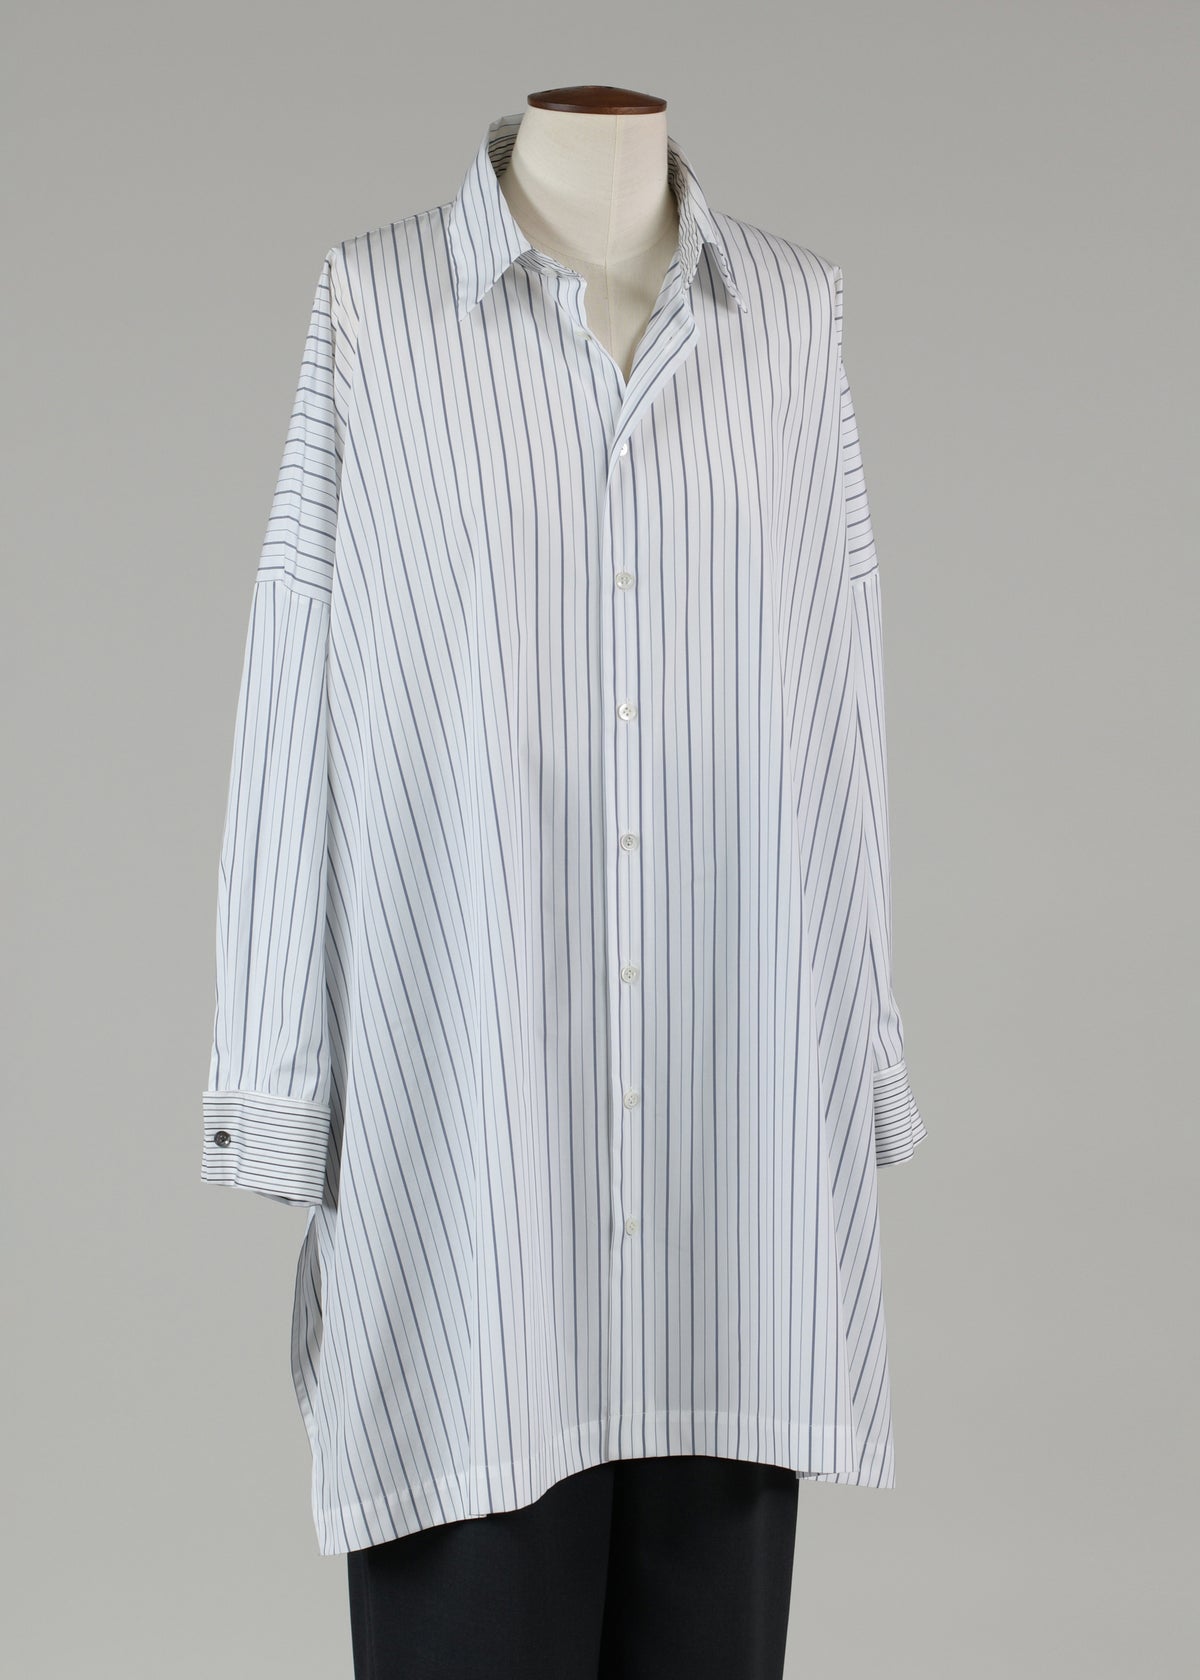 wide longer back shirt with collar and fold cuff - very long with slit